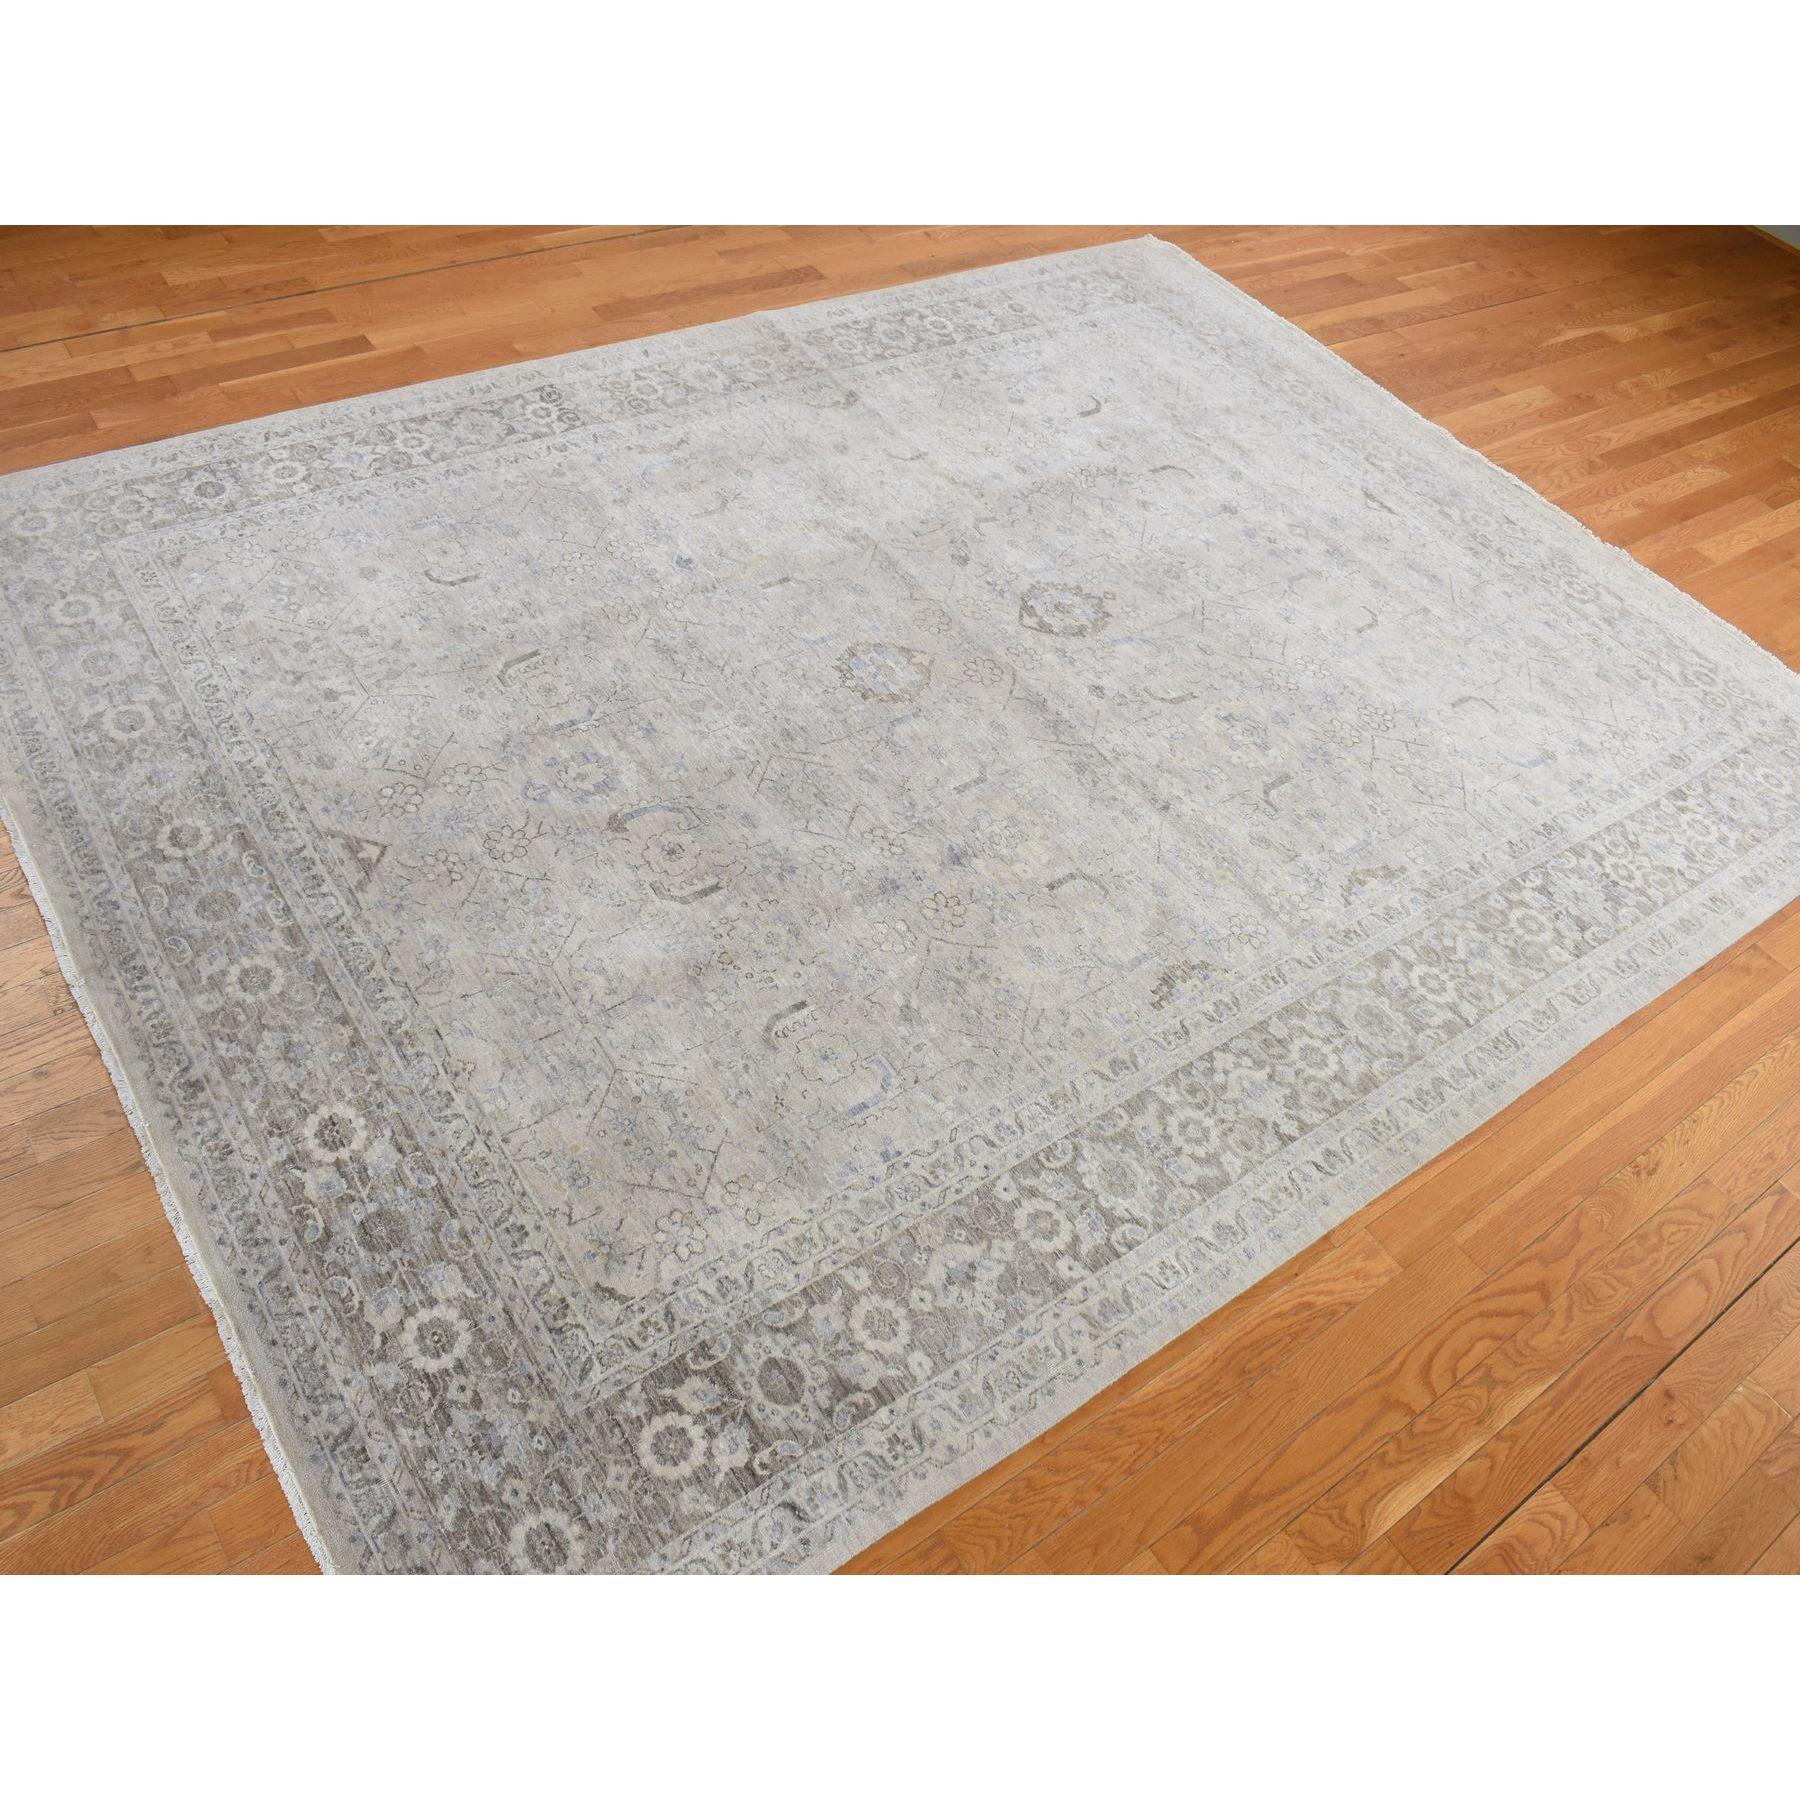 Indian Chateau Gray Hand Knotted Wool Rustic Persian Sultanabad Influence Rug 9'1